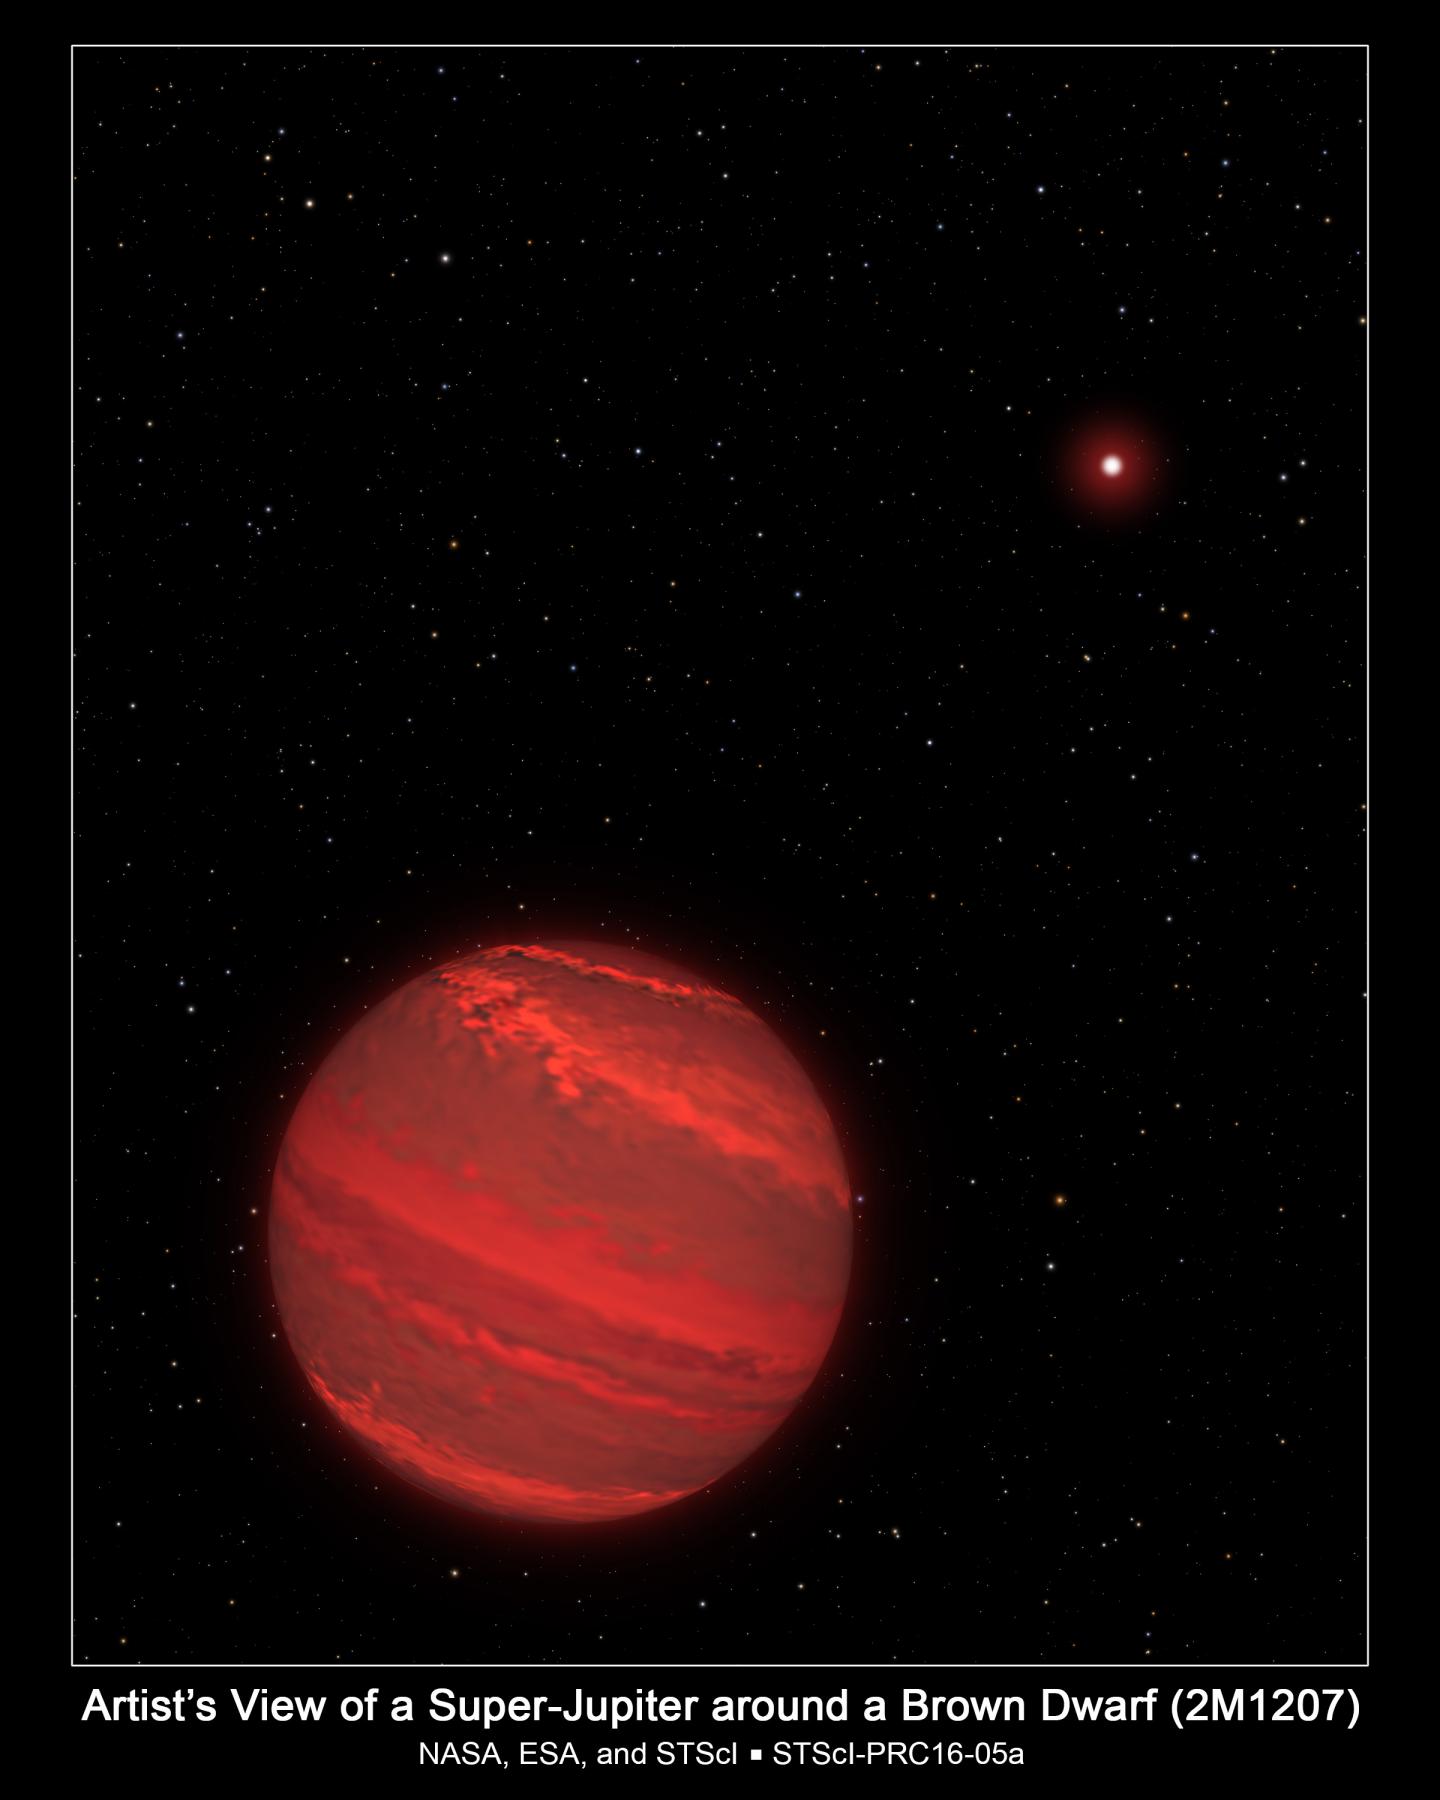 Hubble Directly Measures Rotation of Cloudy 'Super-Jupiter'